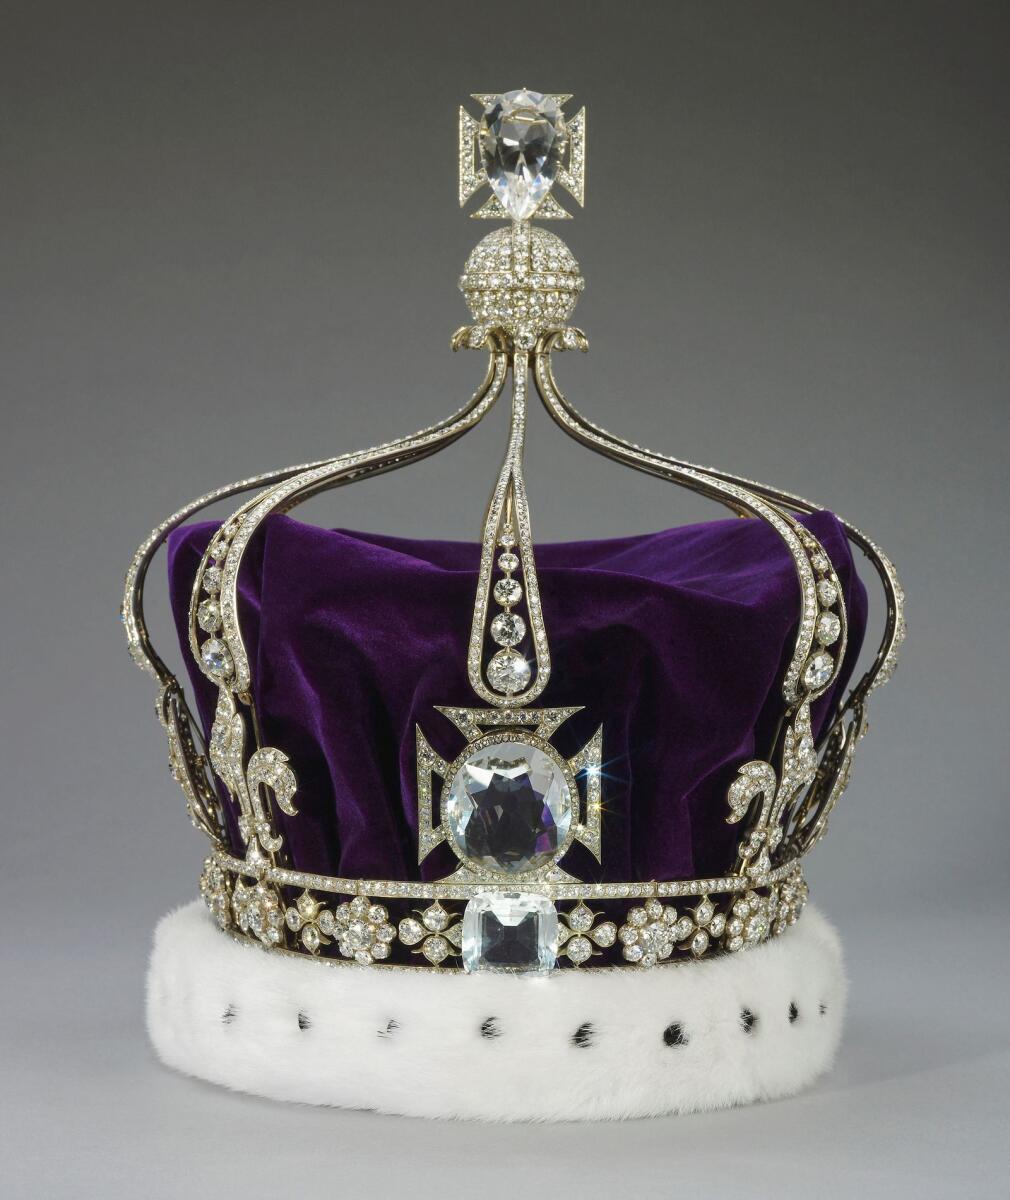 Kohinoor diamond, claimed by Indians, to be cast as symbol of conquest' in  new Tower of London display - News